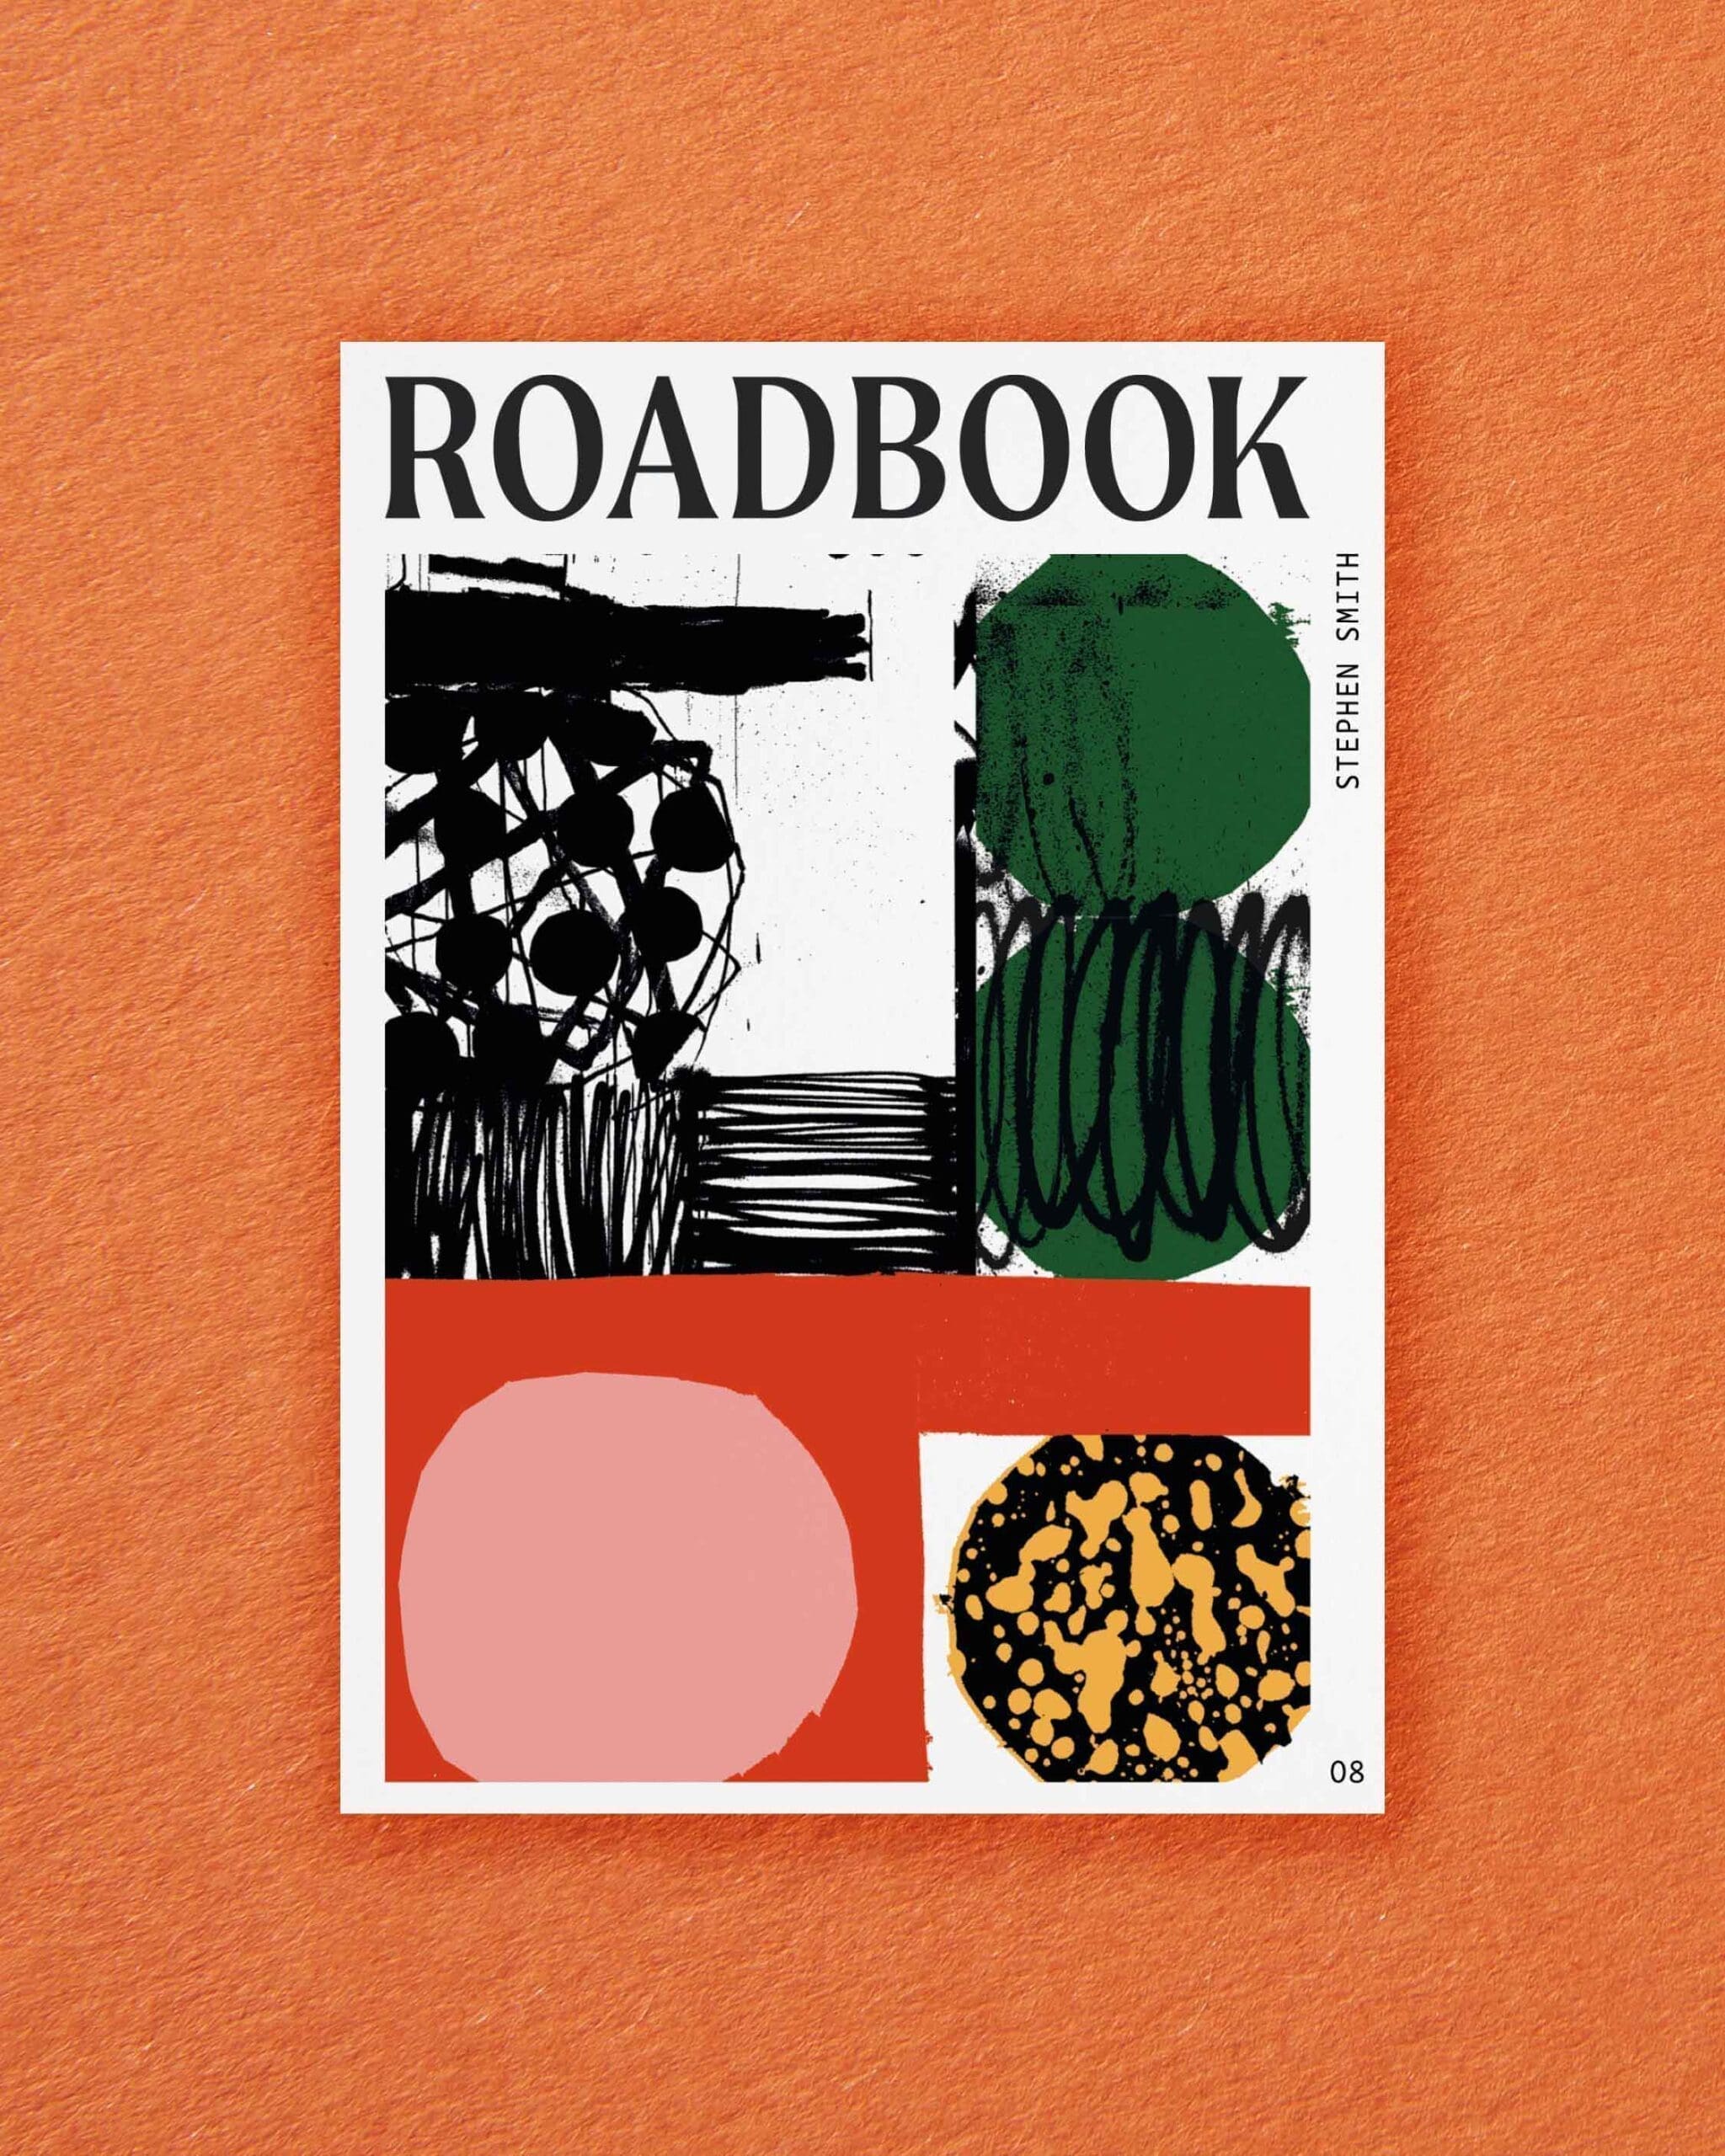 Postcards from ROADBOOK | Stephen Smith's graphic illustration, with black lines, red and pink shapes and green sketches